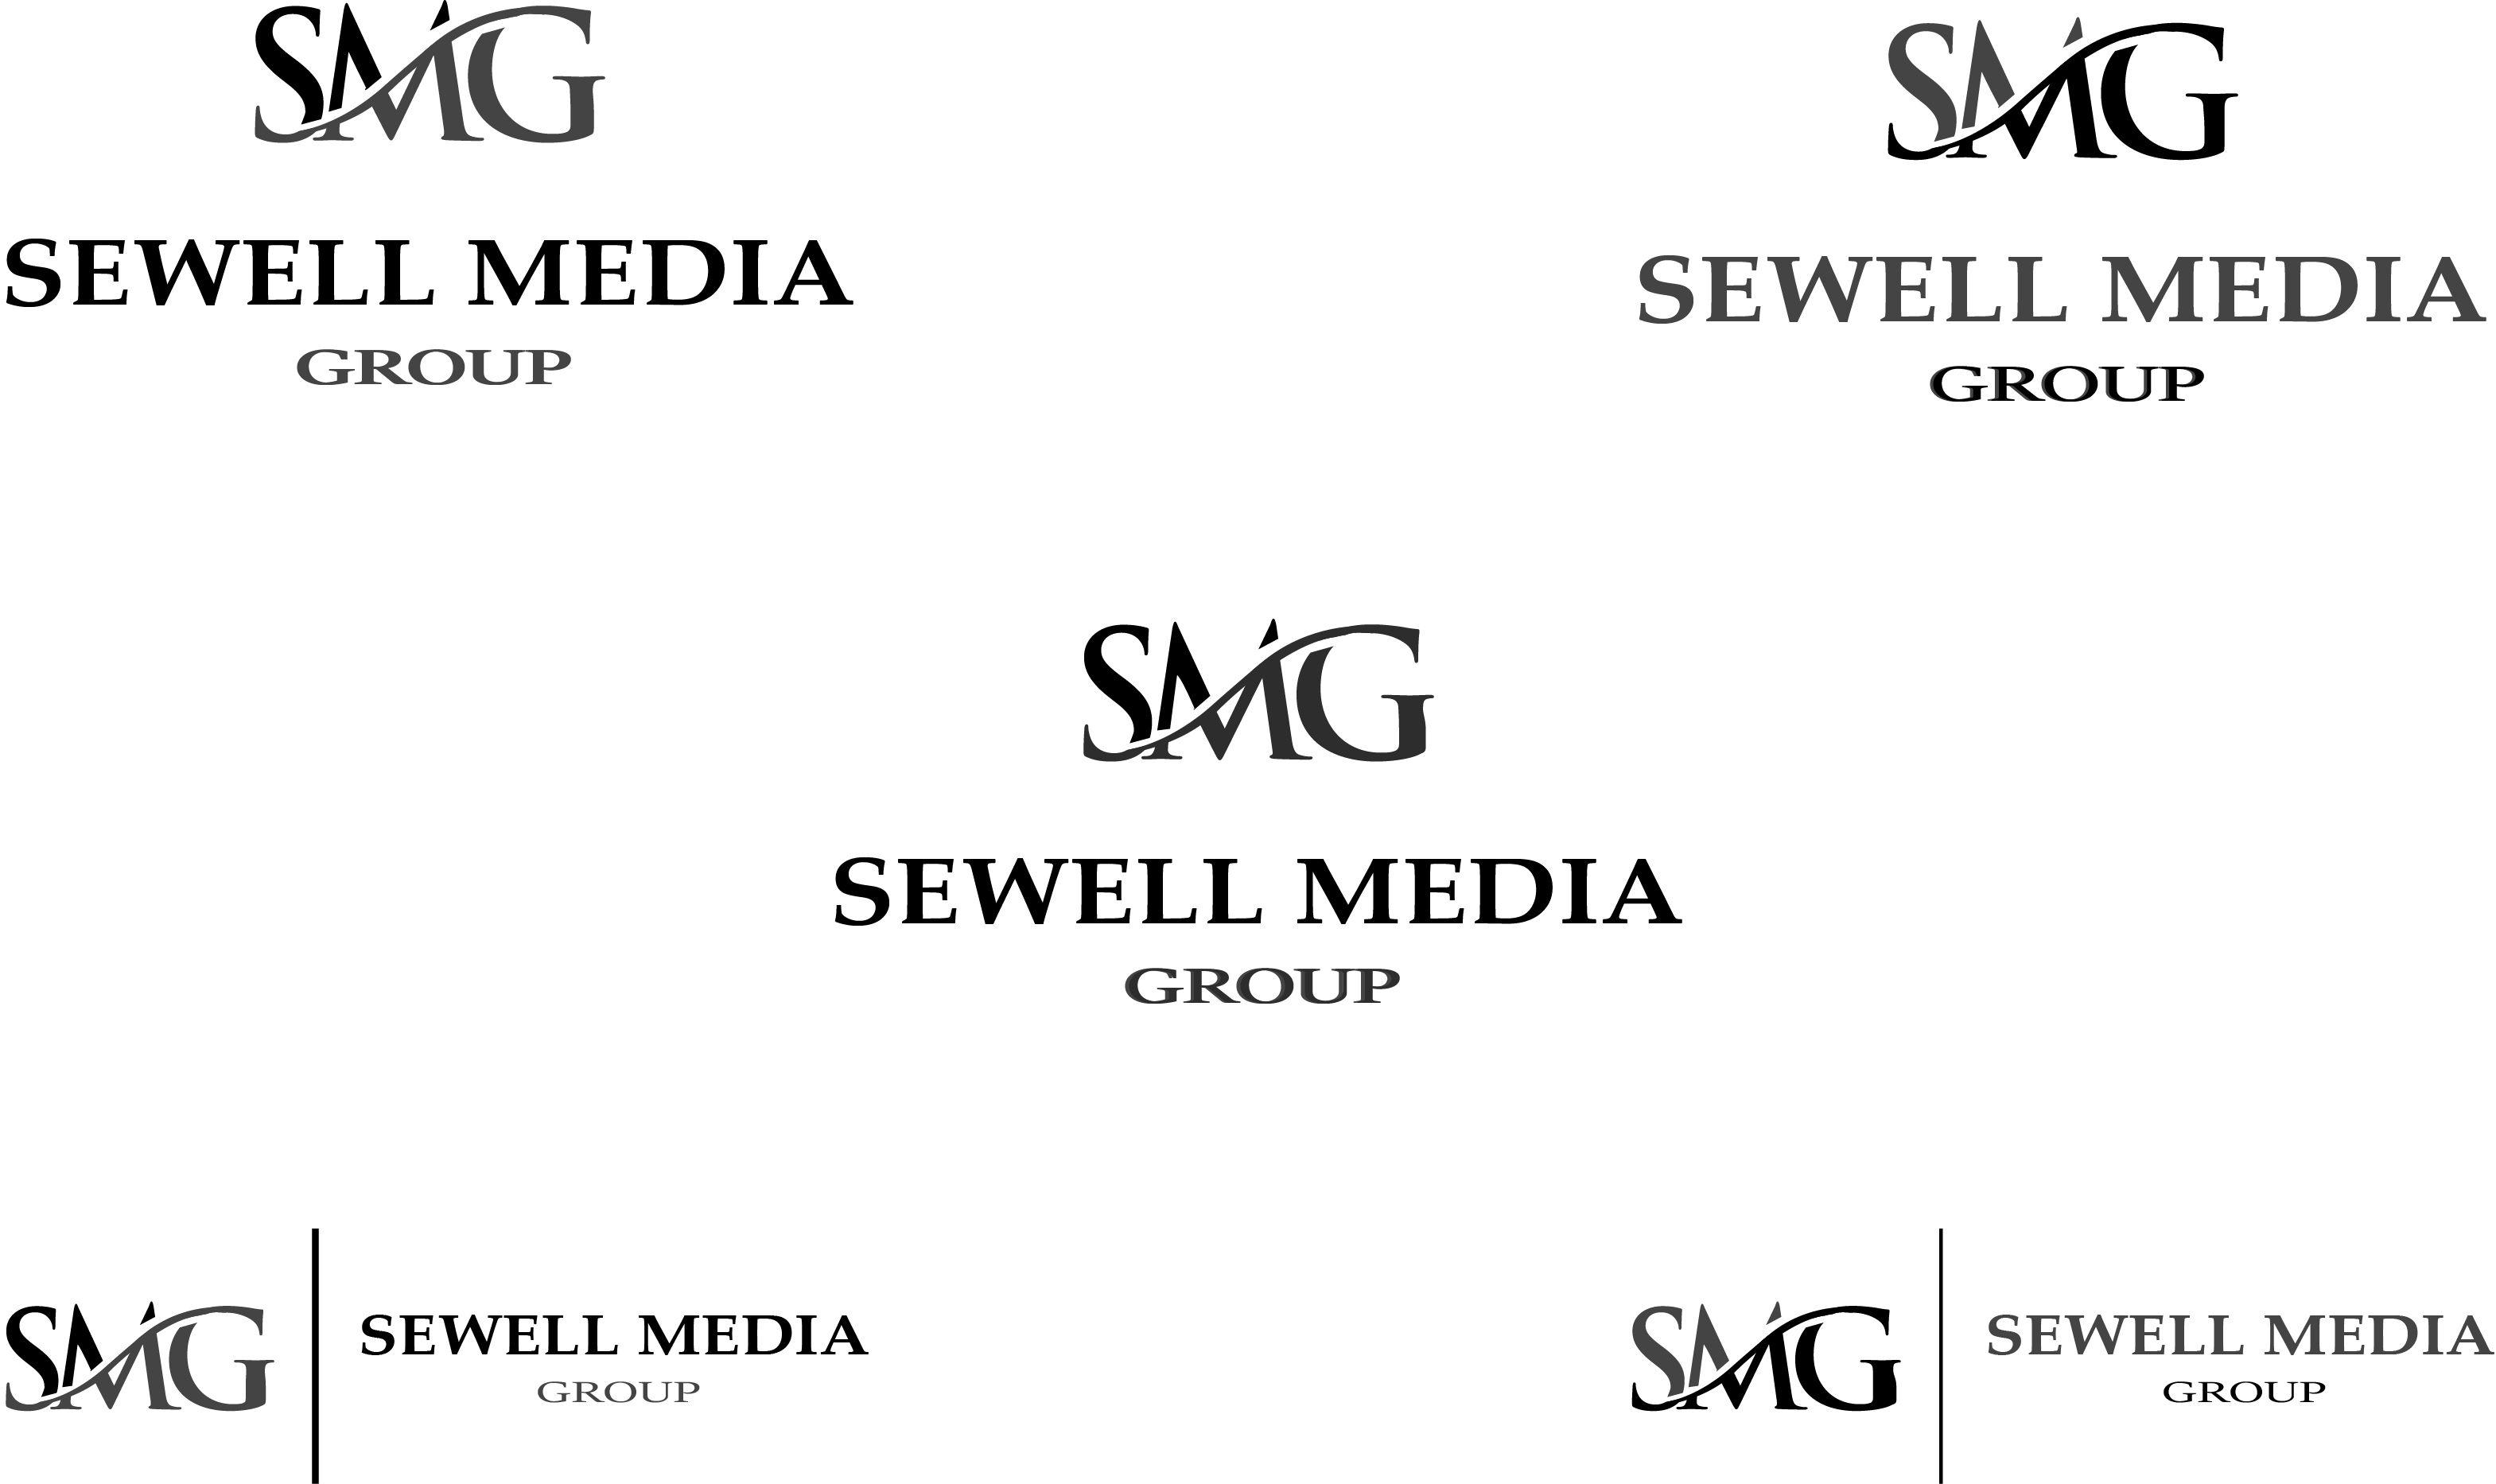 Sewell Logo - Logo Design for SEWELL MEDIA GROUP by creative creations | Design ...